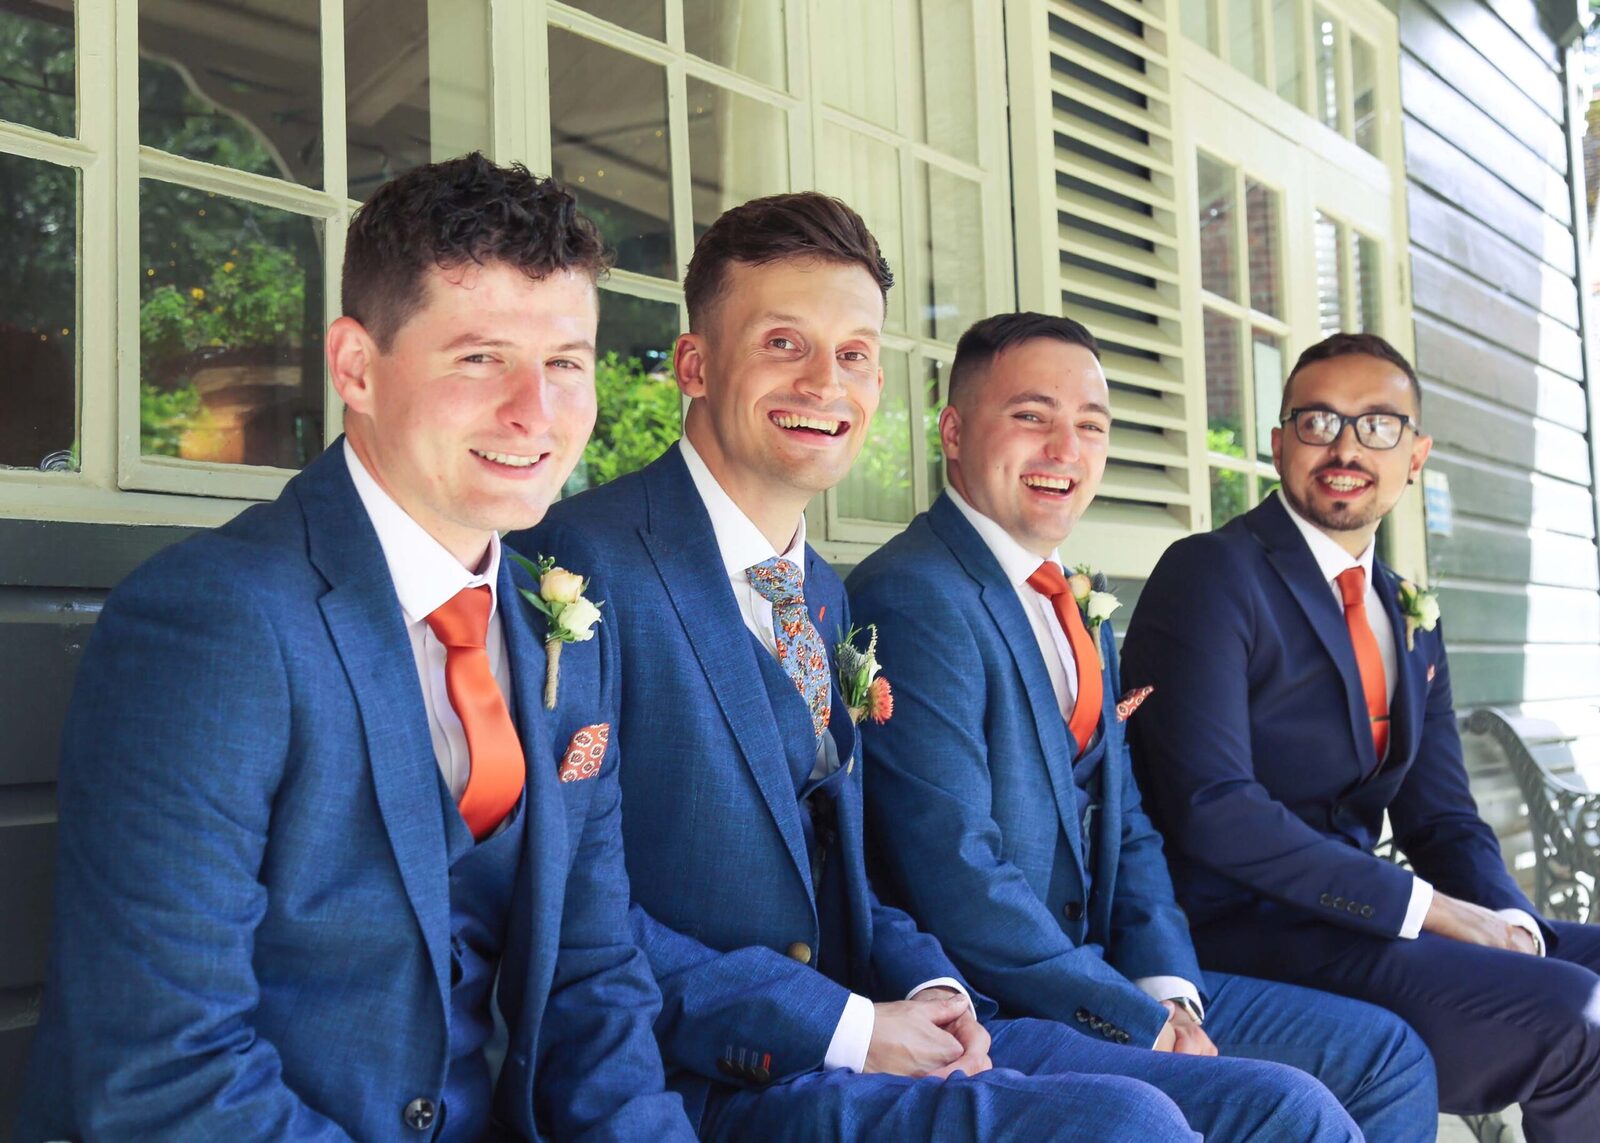 A groom and his groomsmen sat smiling before his wedding ceremony at The Pavillion at Ravenwood Hall Wedding Venue in Suffolk photographed by Suffolk Wedding Photographers Hayley Denston Photography